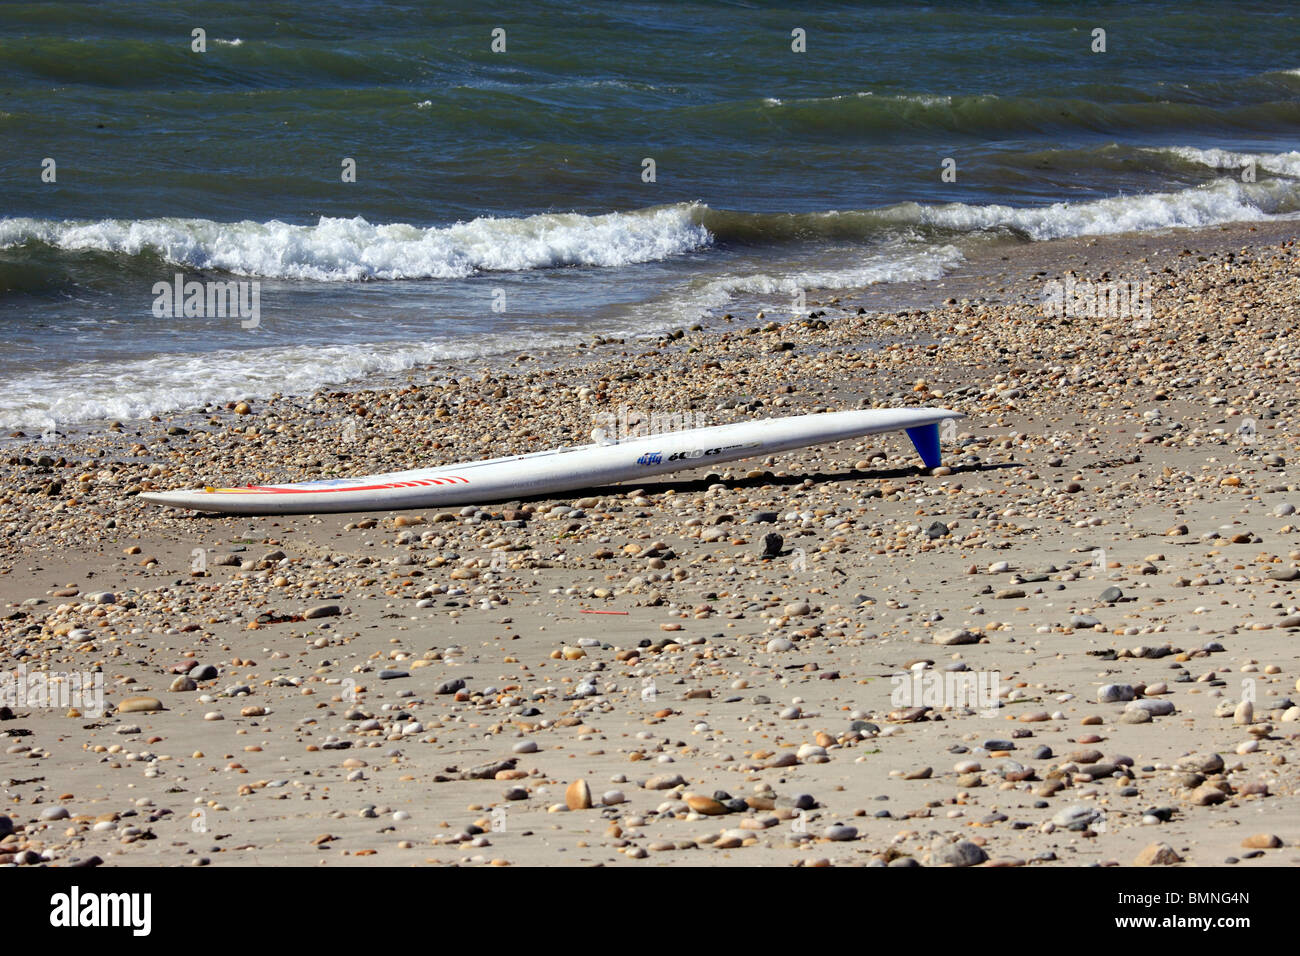 Surf Board on beach, Long Island, NY Banque D'Images